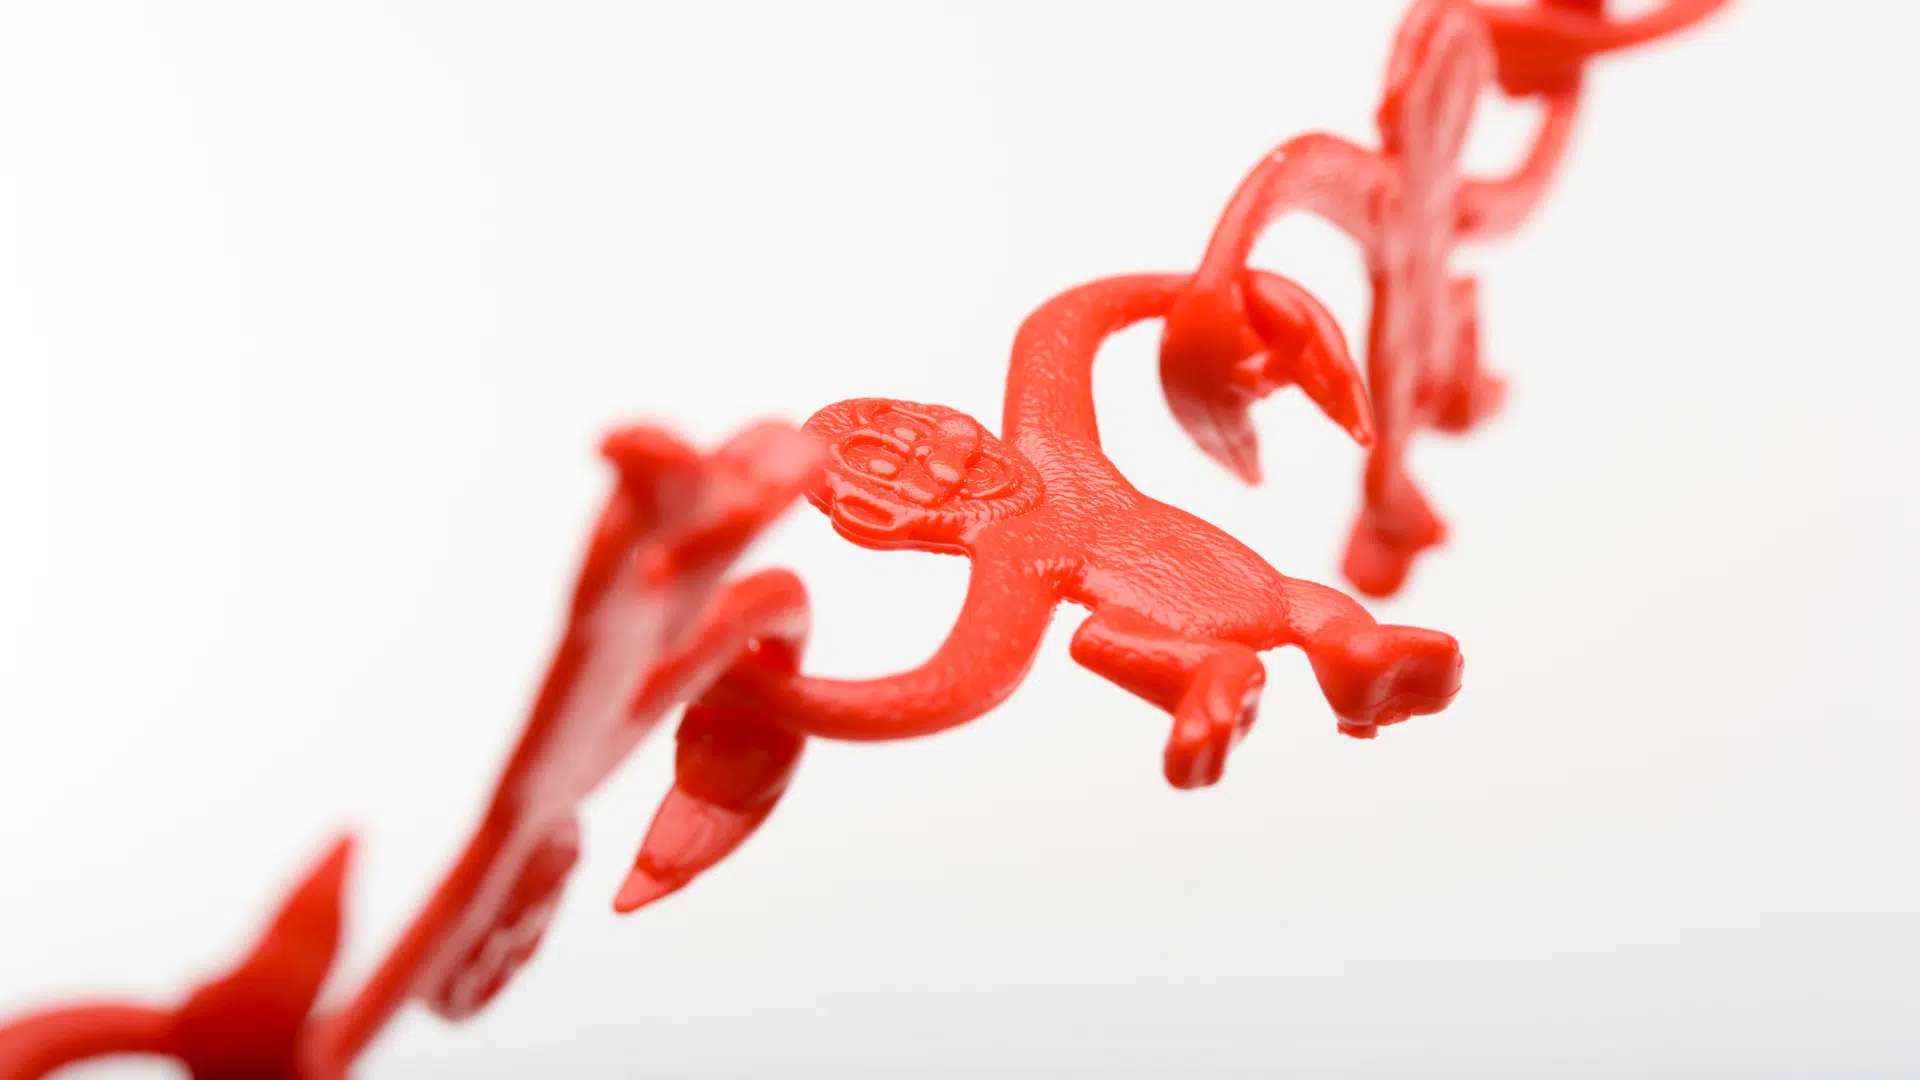 Red DNA strand with plastic monkey intertwined